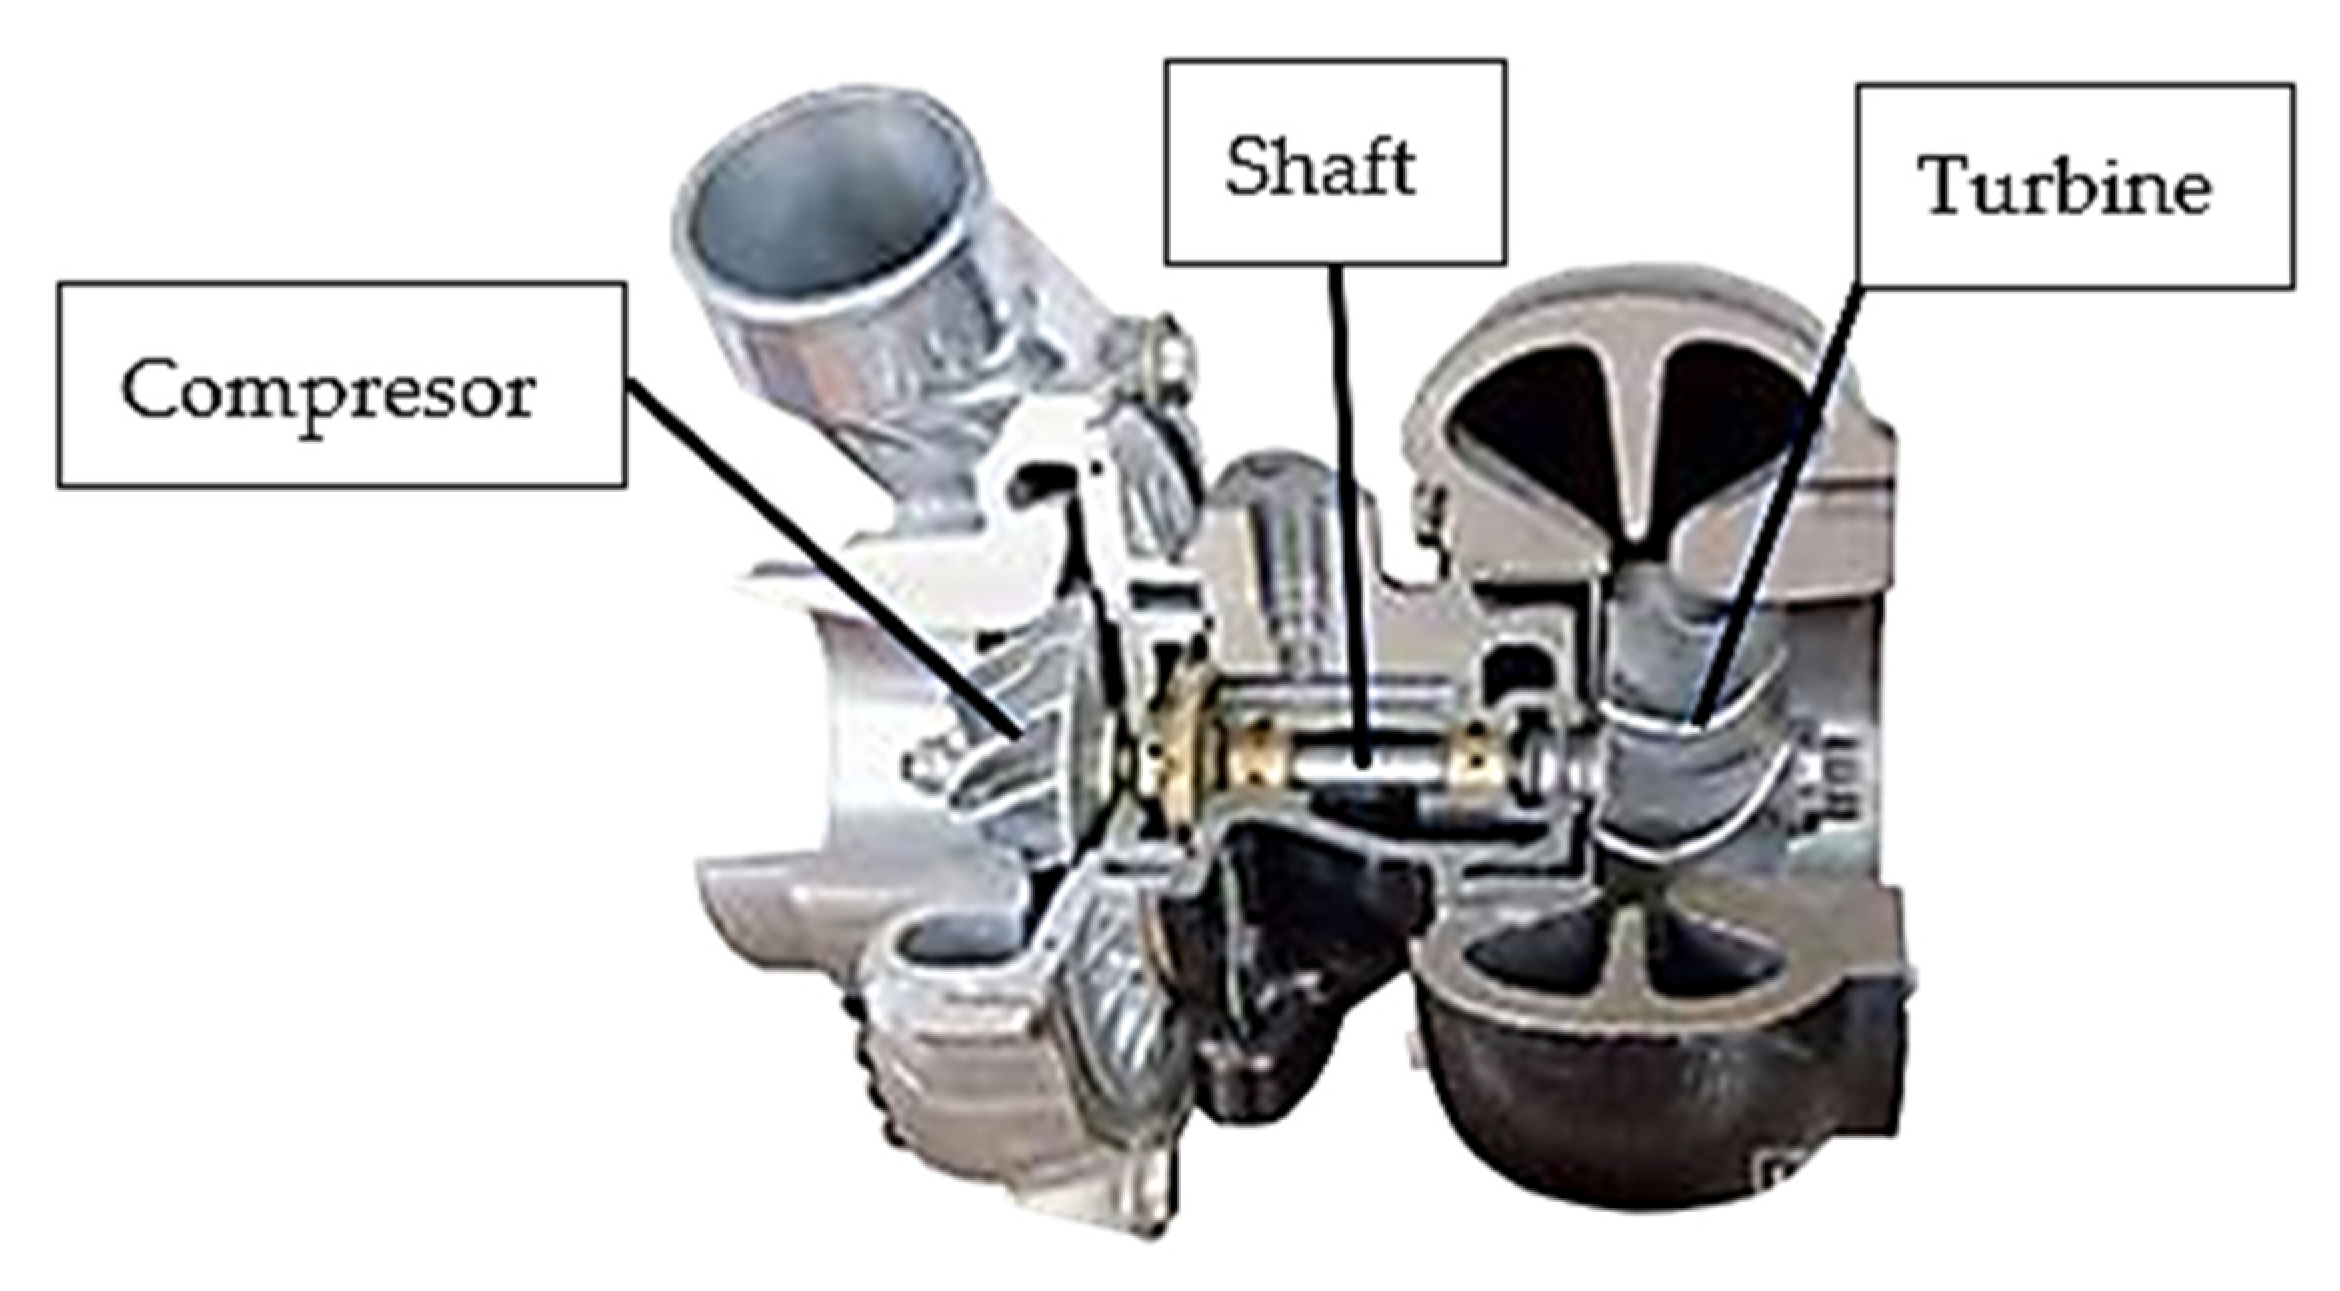 Materials | Free Full-Text | Rebuilding of Turbocharger Shafts by Hardfacing